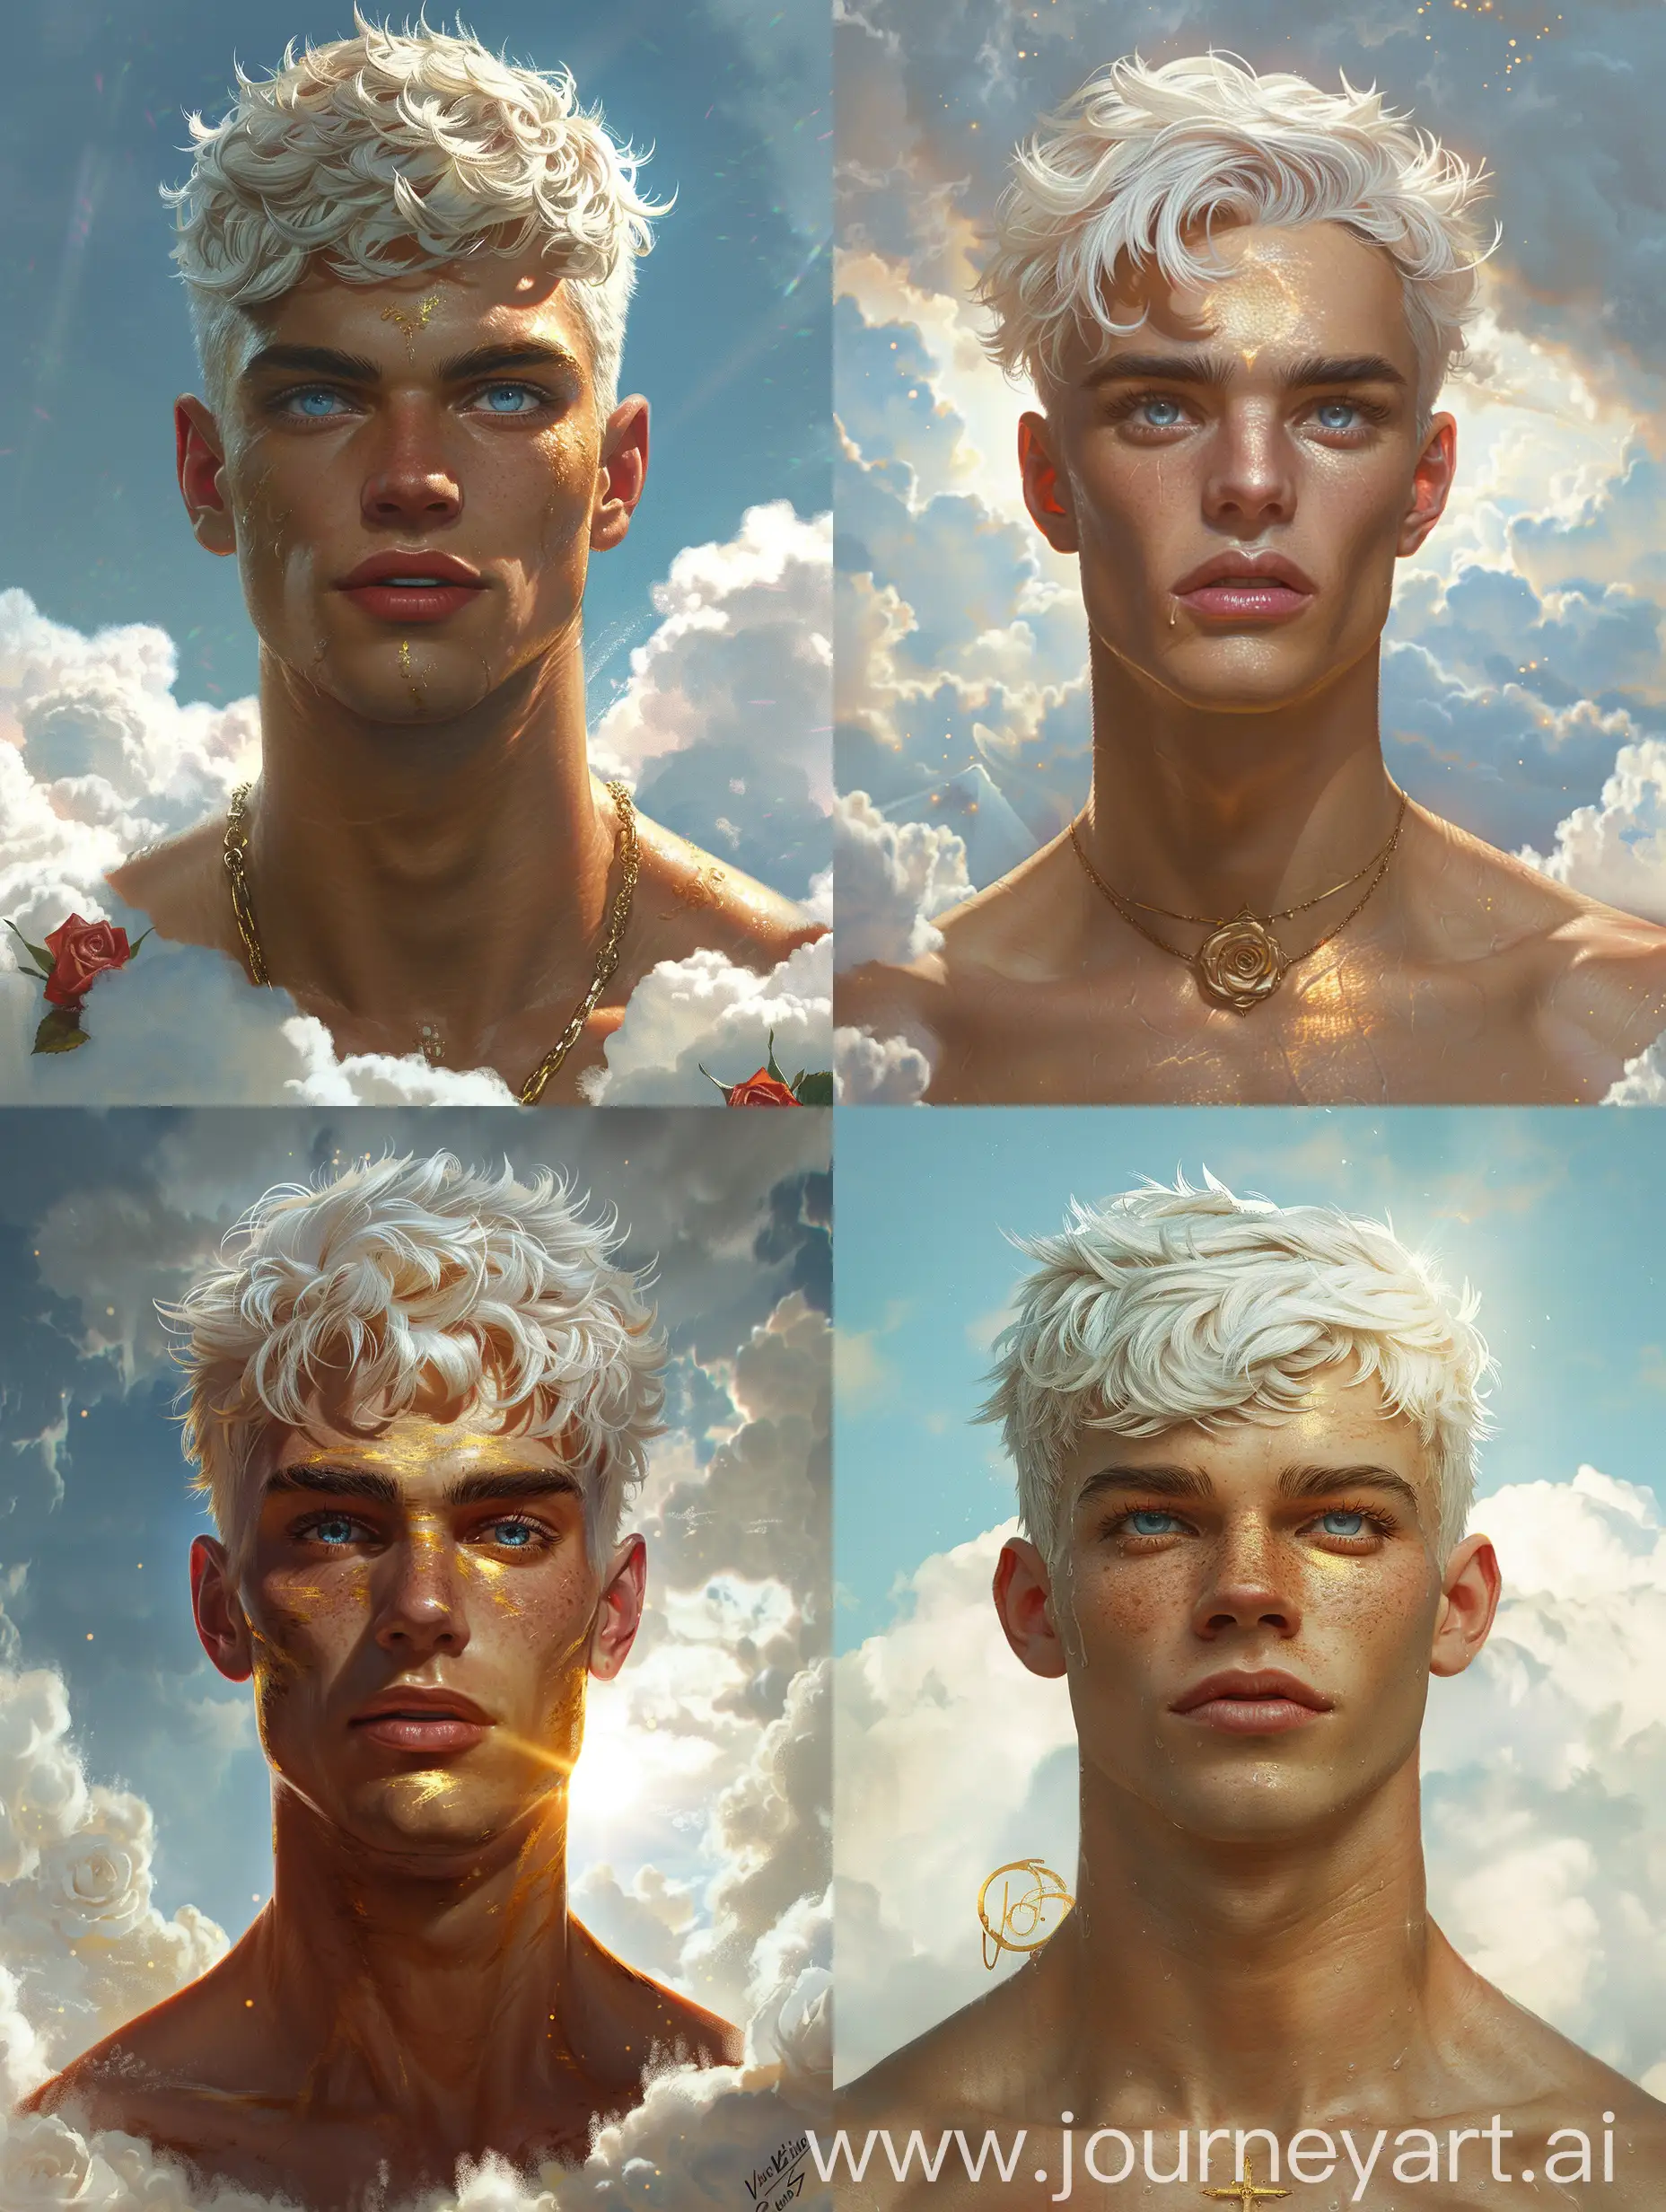 Subject: a demigod of unnatural power and beauty as a man; bronze tanned golden skin, short silky shiny white hair, dark blue eyes, very muscular and lean and toned and chiseled, feminine wiles and features, oval-square shaped face with full lips, roses and defined cheekbones, almond shaped eyes. 
Setting: high up in the clouds with the beautiful realm of the sky behind him shinning bright for its young prince. 
Style/coloring: extremely realistic painted realism, detailed digital painting concept art, detailed paiting by gaston bussiere, craig mullins A mystical, dreamlike portrait in a cinematic style, Ed Emsh, Virgil Finlay, Norman Saunders, Hubert Rogers, Earle Bergey, Kelly Freas --upbeta --s 250